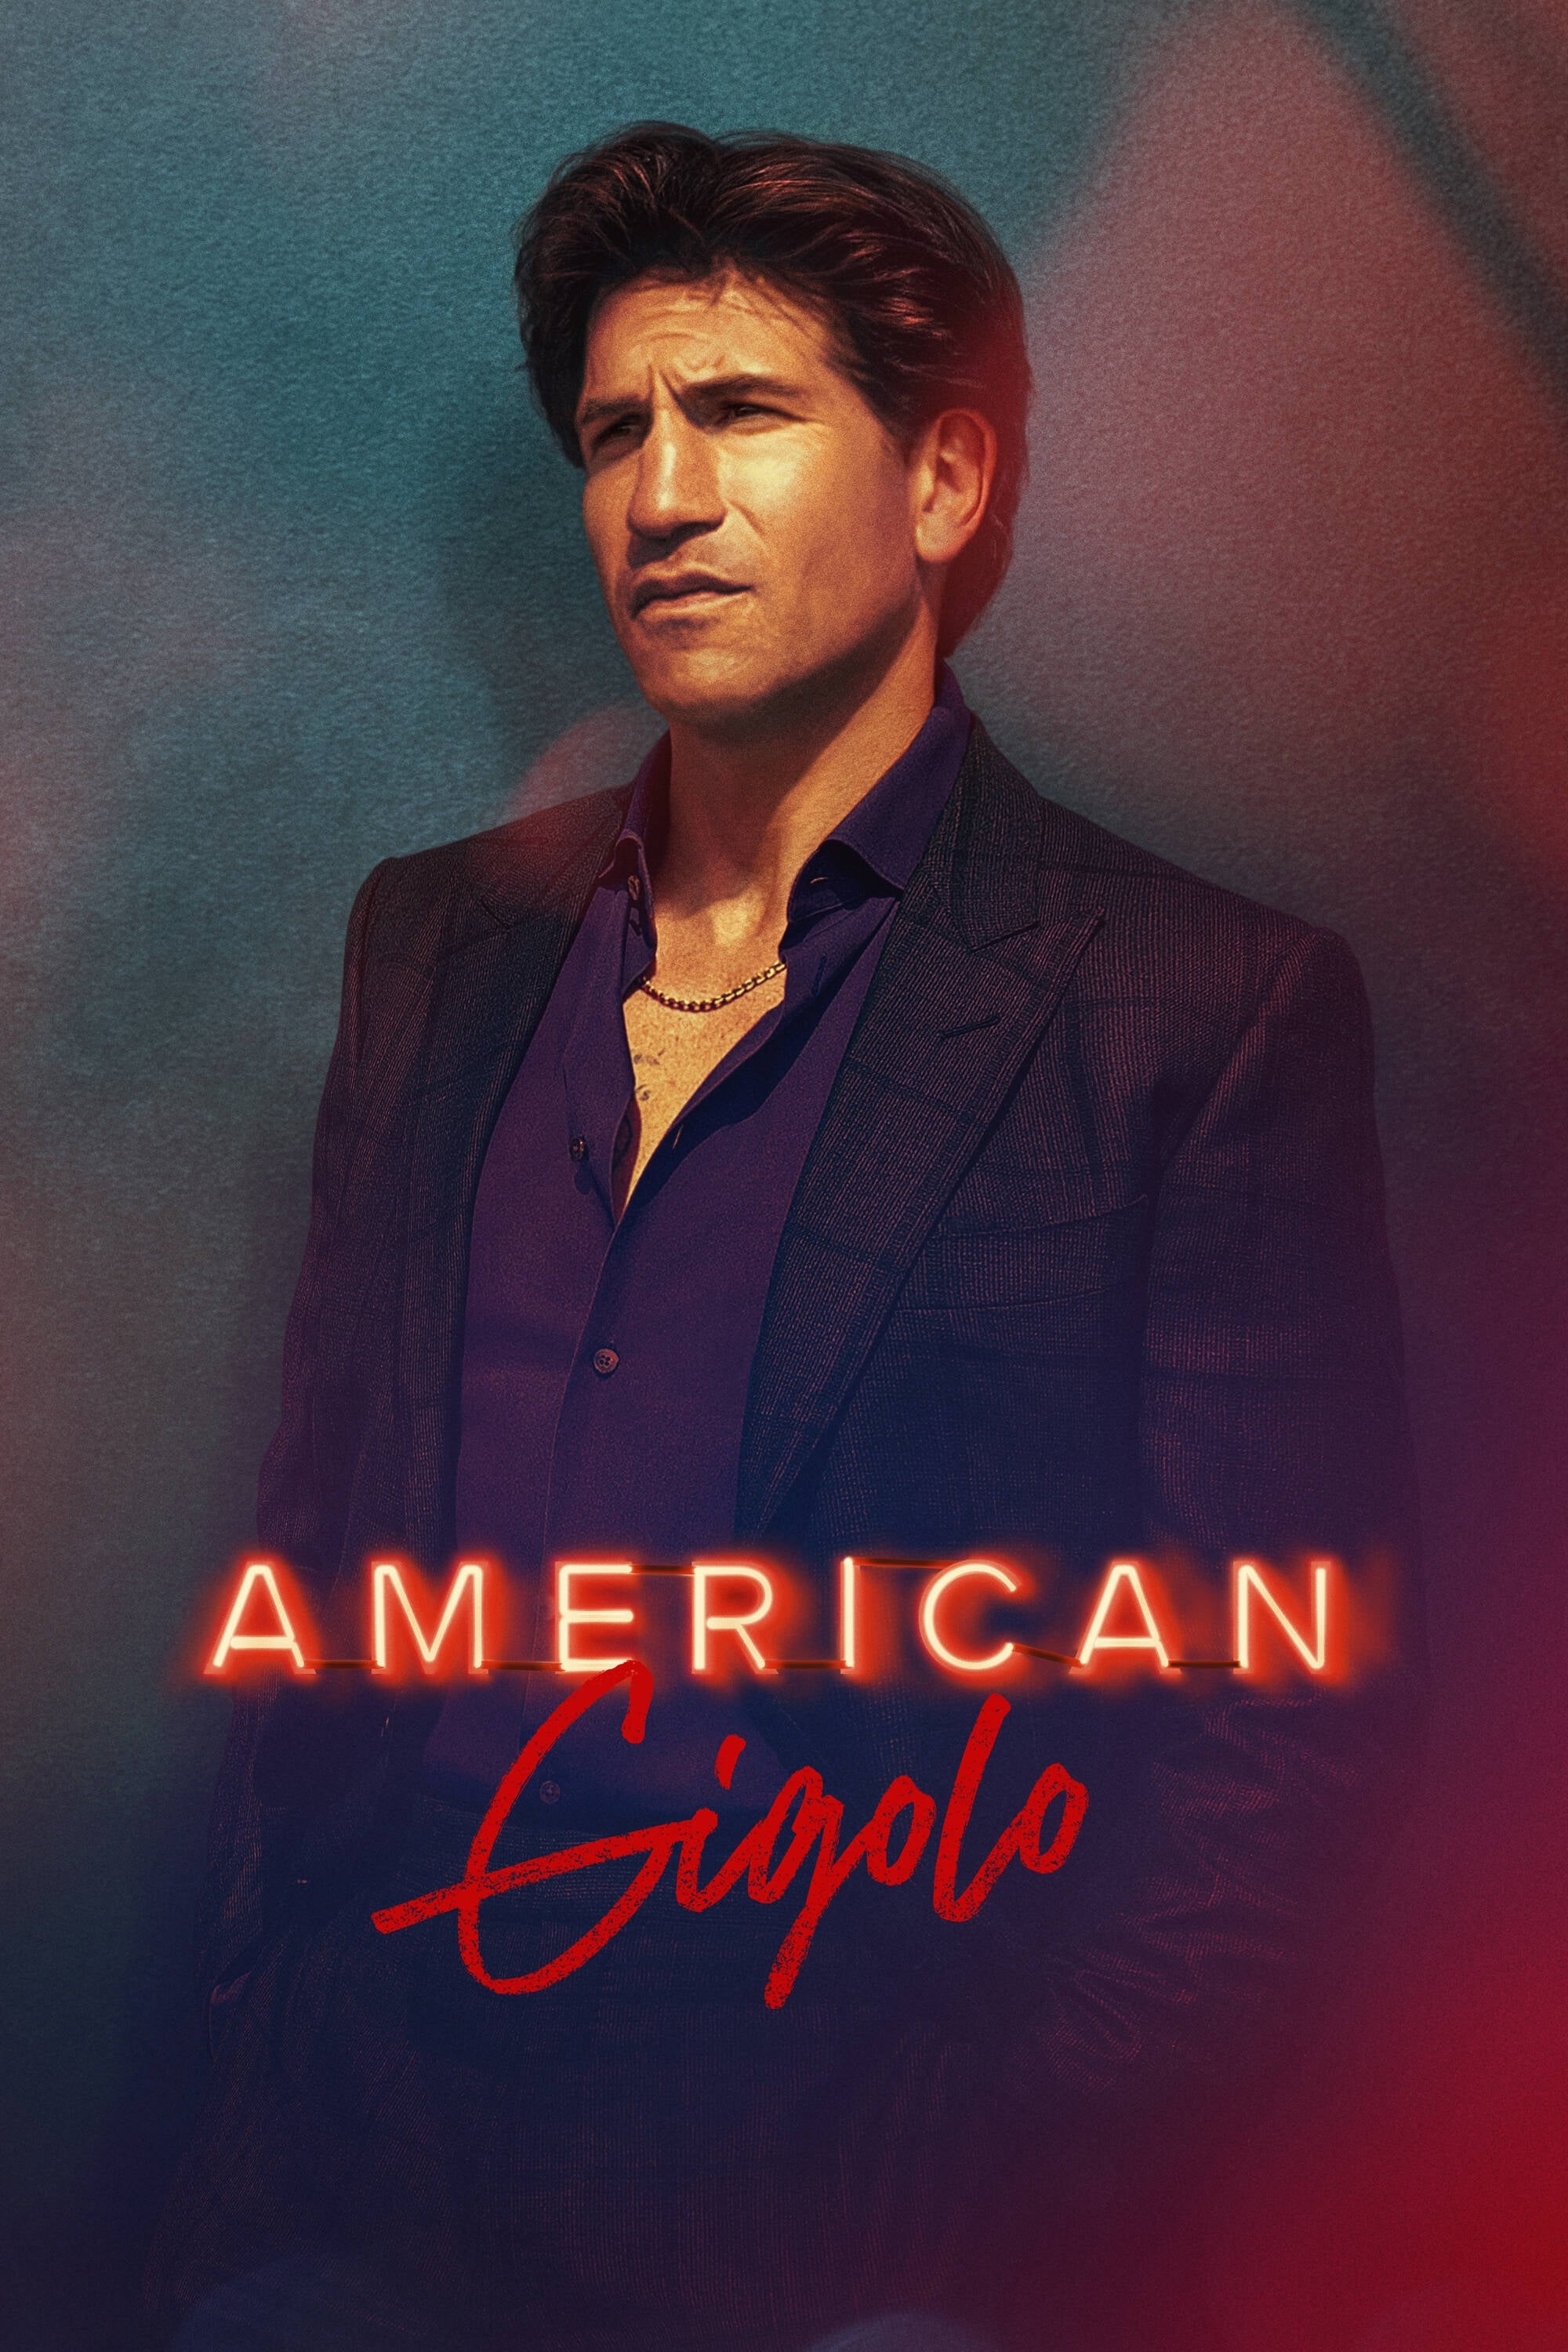 American Gigolo TV Shows About Angel